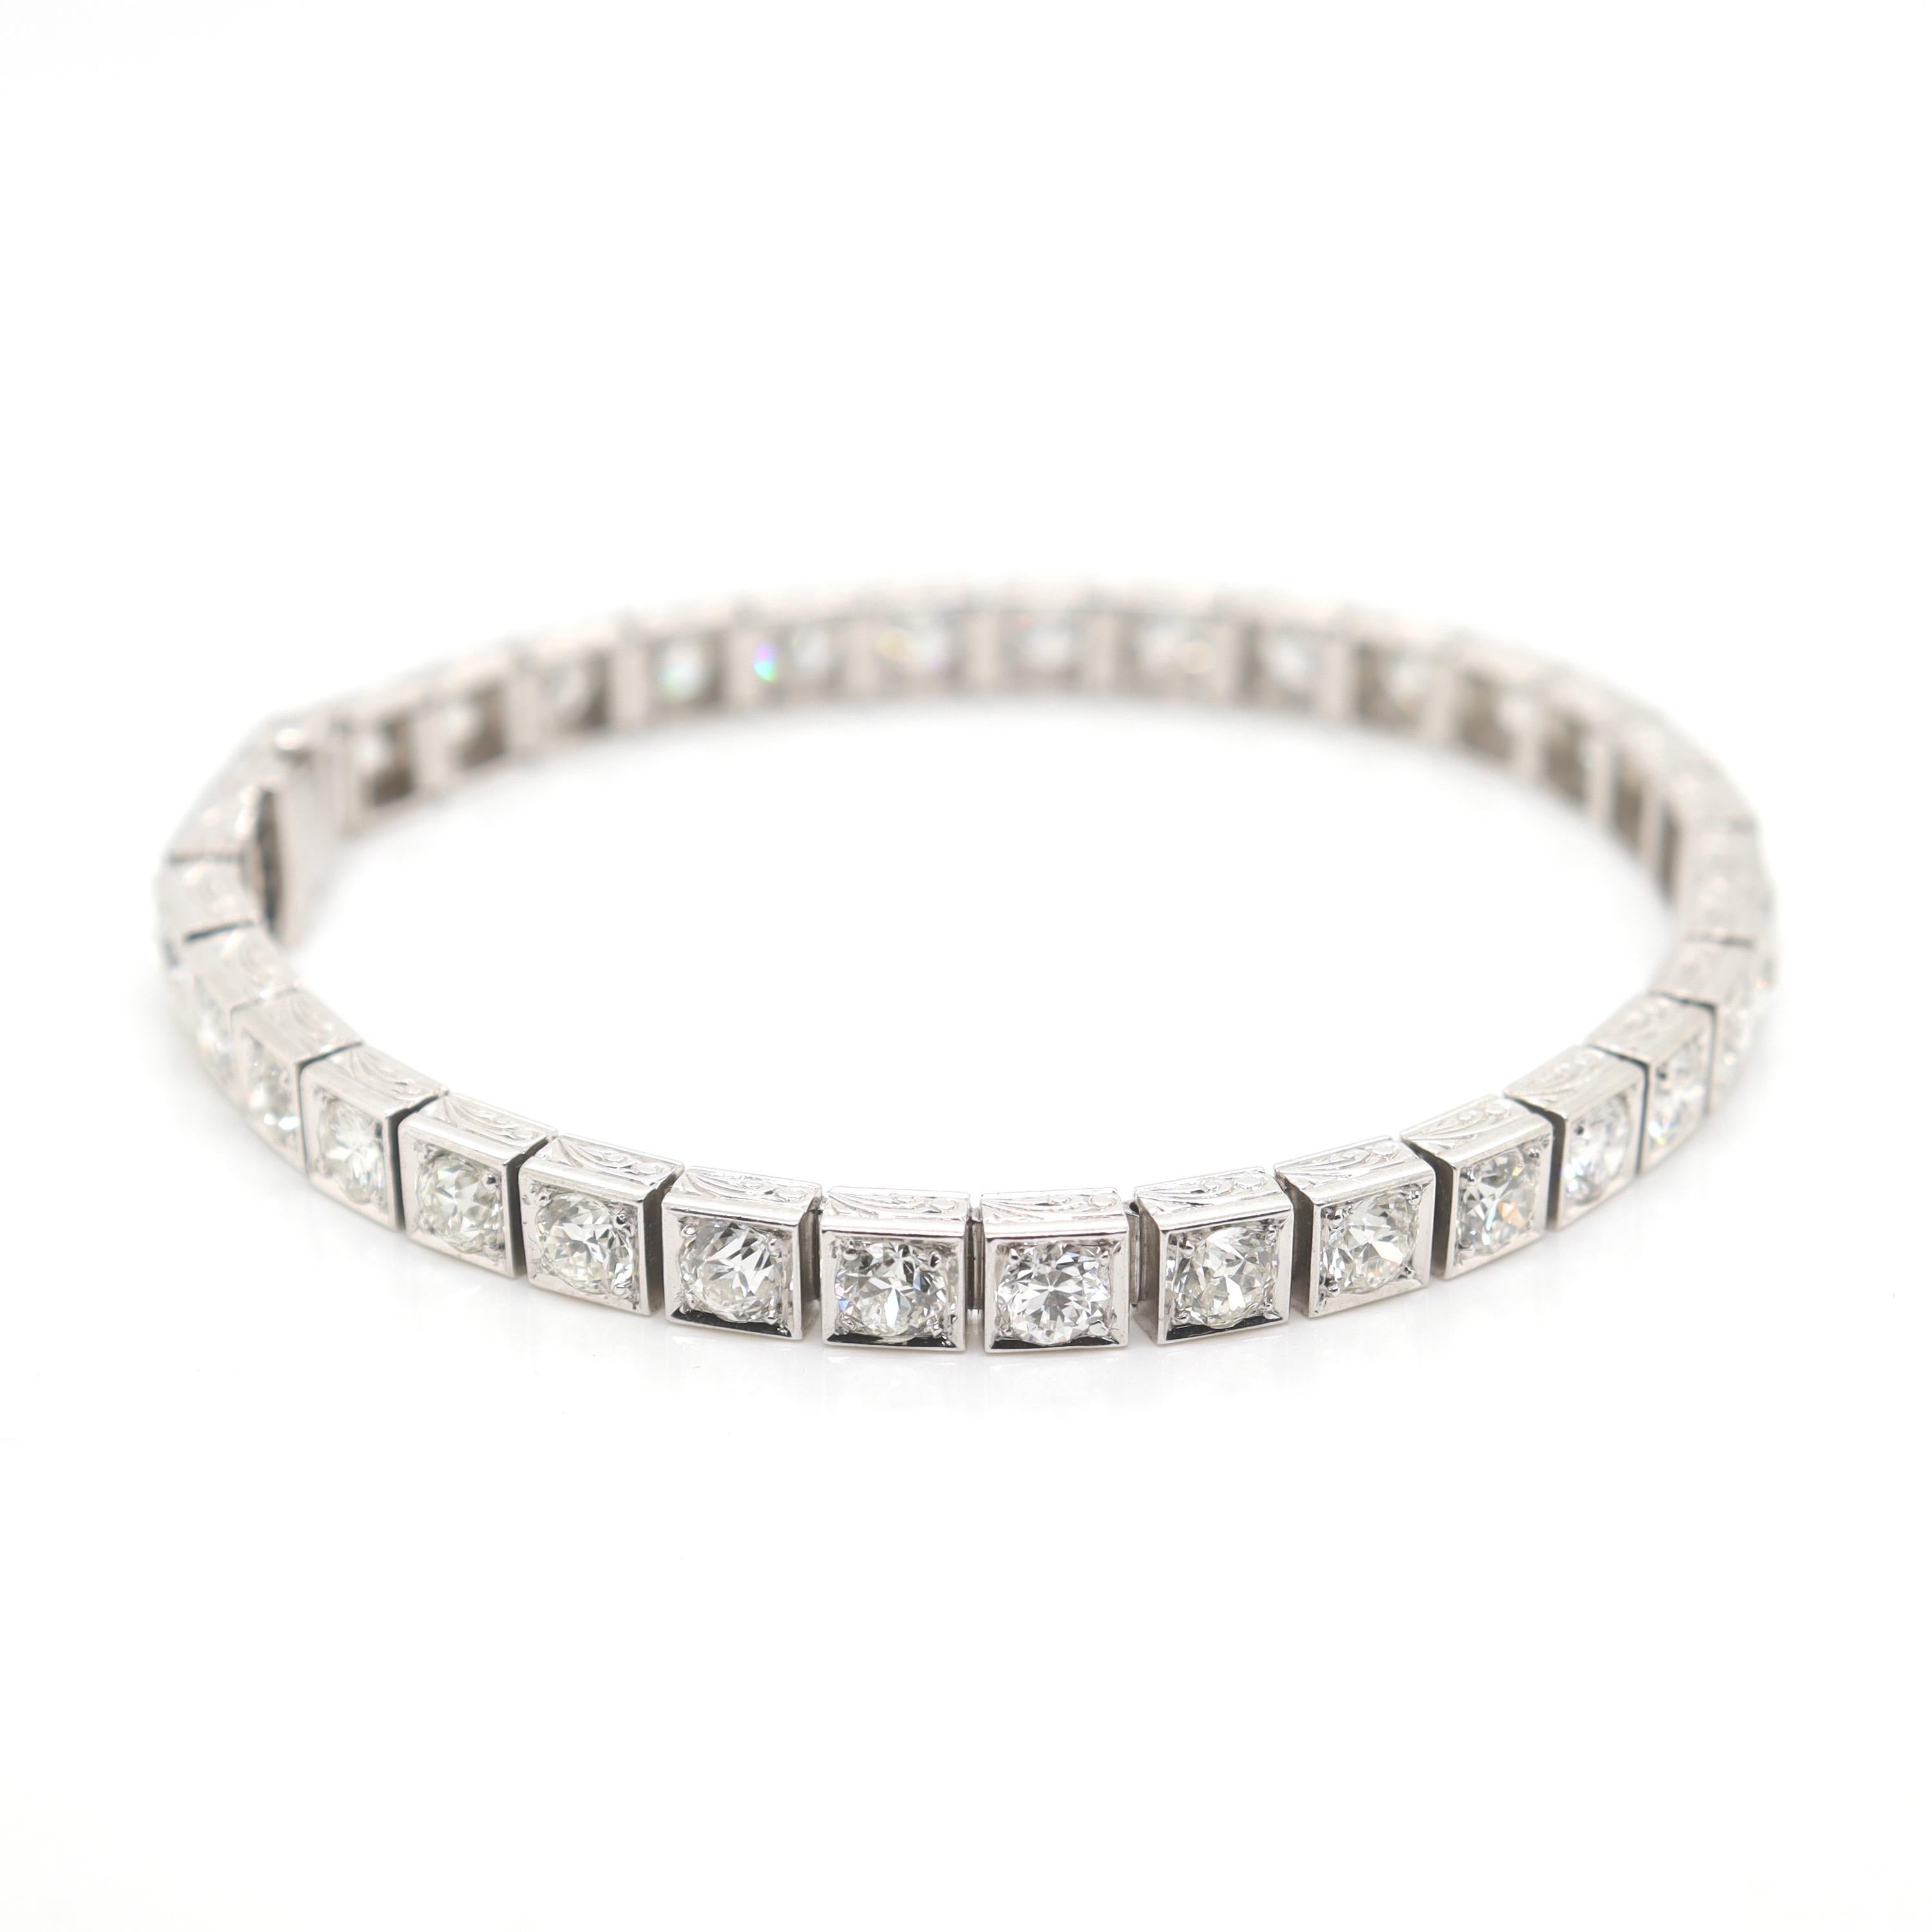 A very fine antique Art Deco period diamond and platinum tennis bracelet.

Set with 34 Old European and Transitional Round Brilliant cut diamonds with an approximate 10.65 total carat weight, VVS-VS clarity, G-H-I color. Each prong set in a square